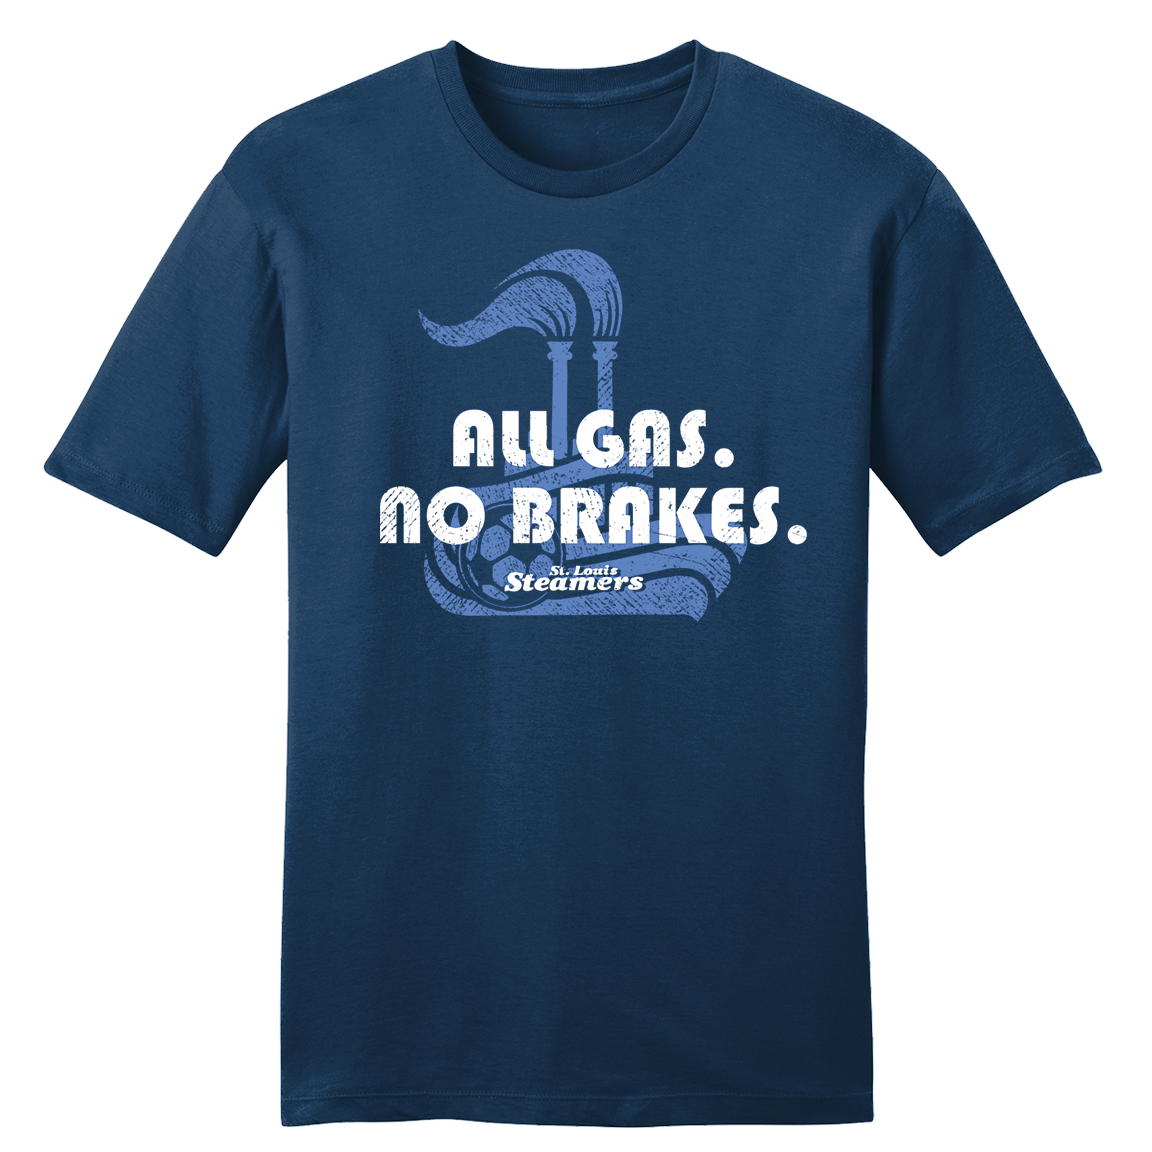 St. Louis Steamers All Gas tee